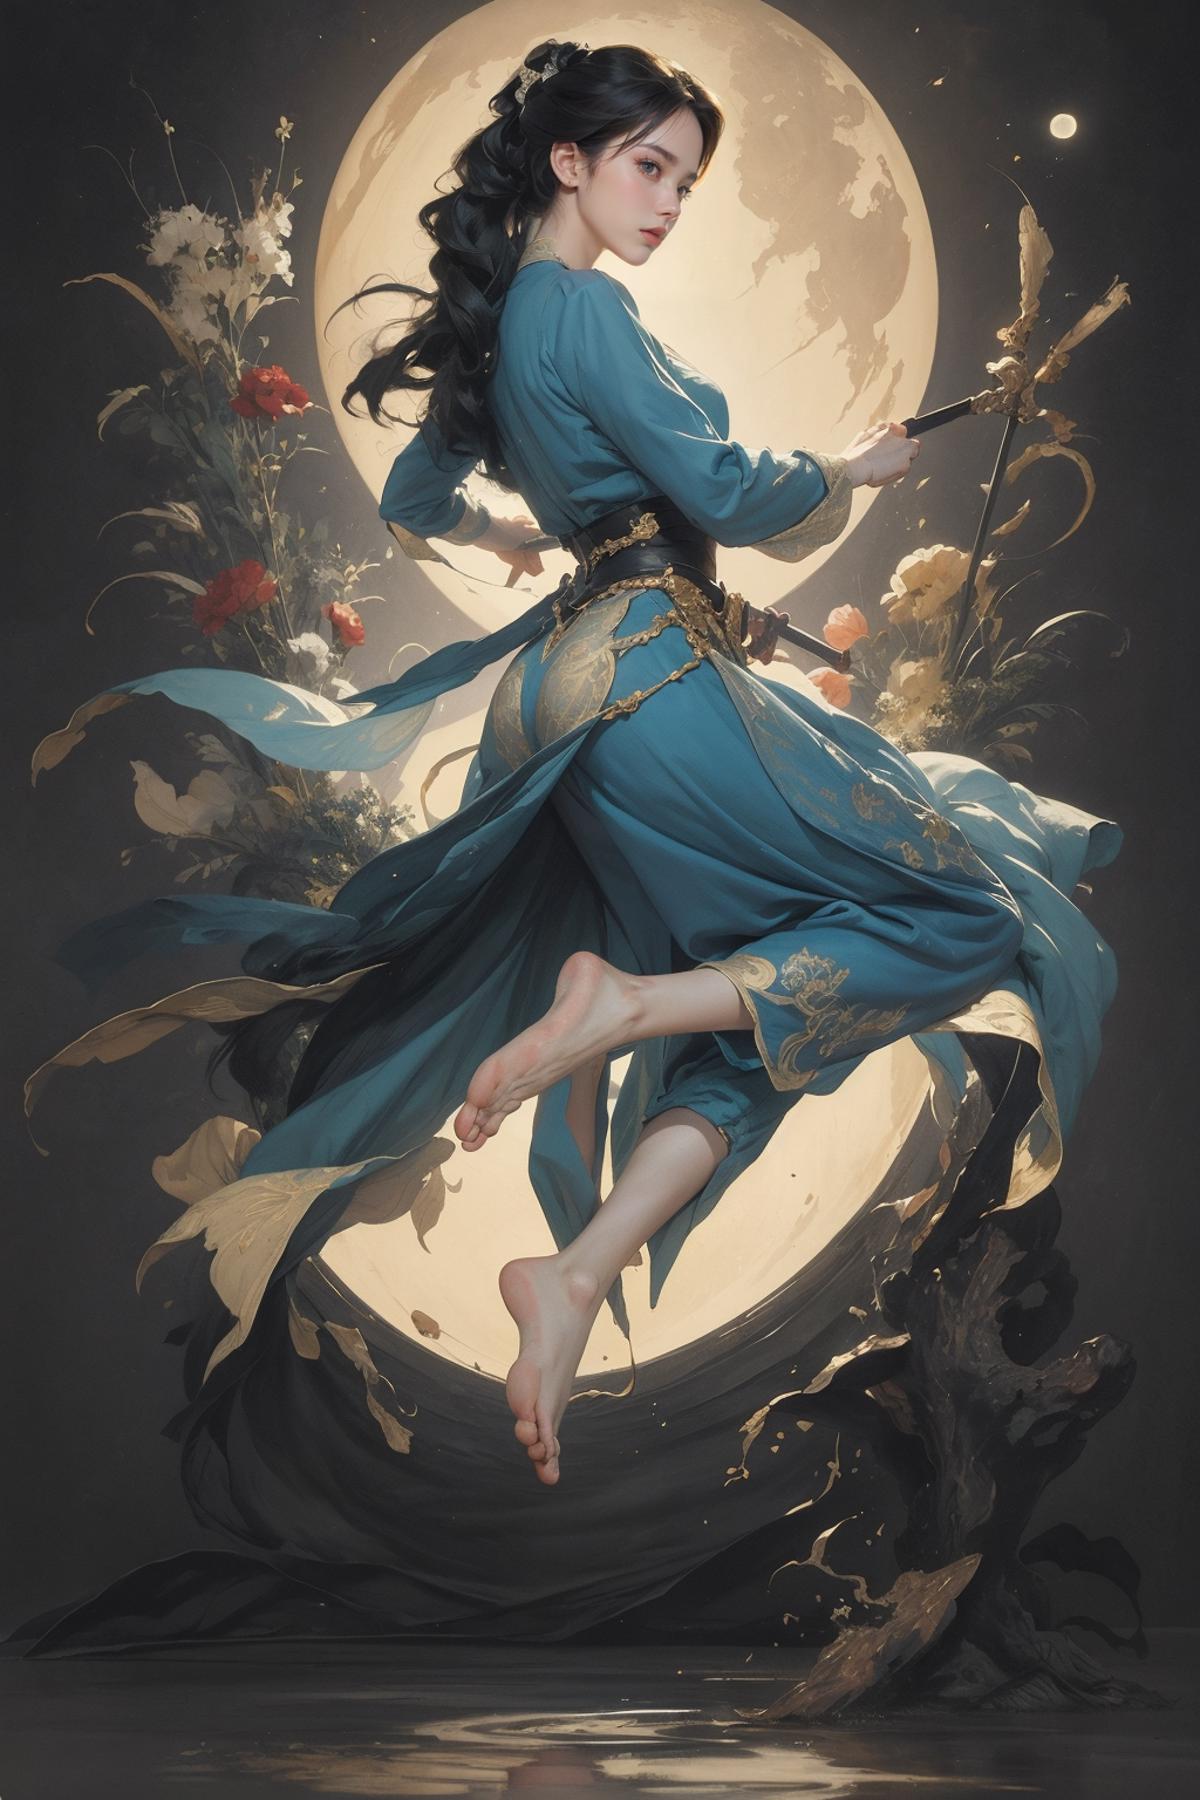 A girl in a blue dress holding a sword in front of a moon.